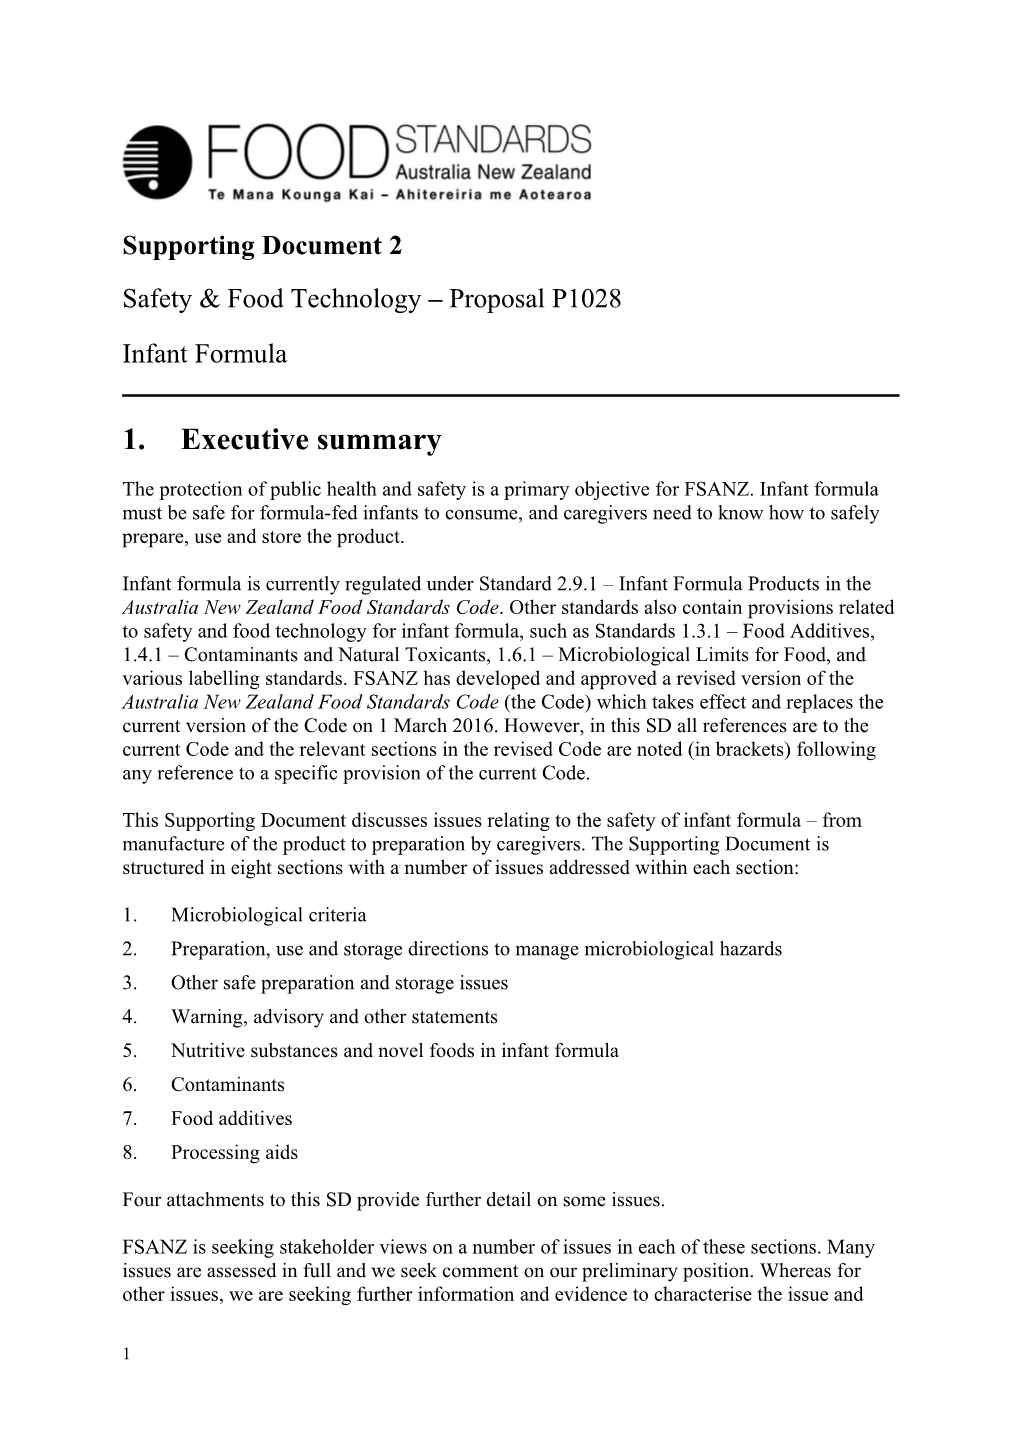 Safety & Food Technology Proposal P1028